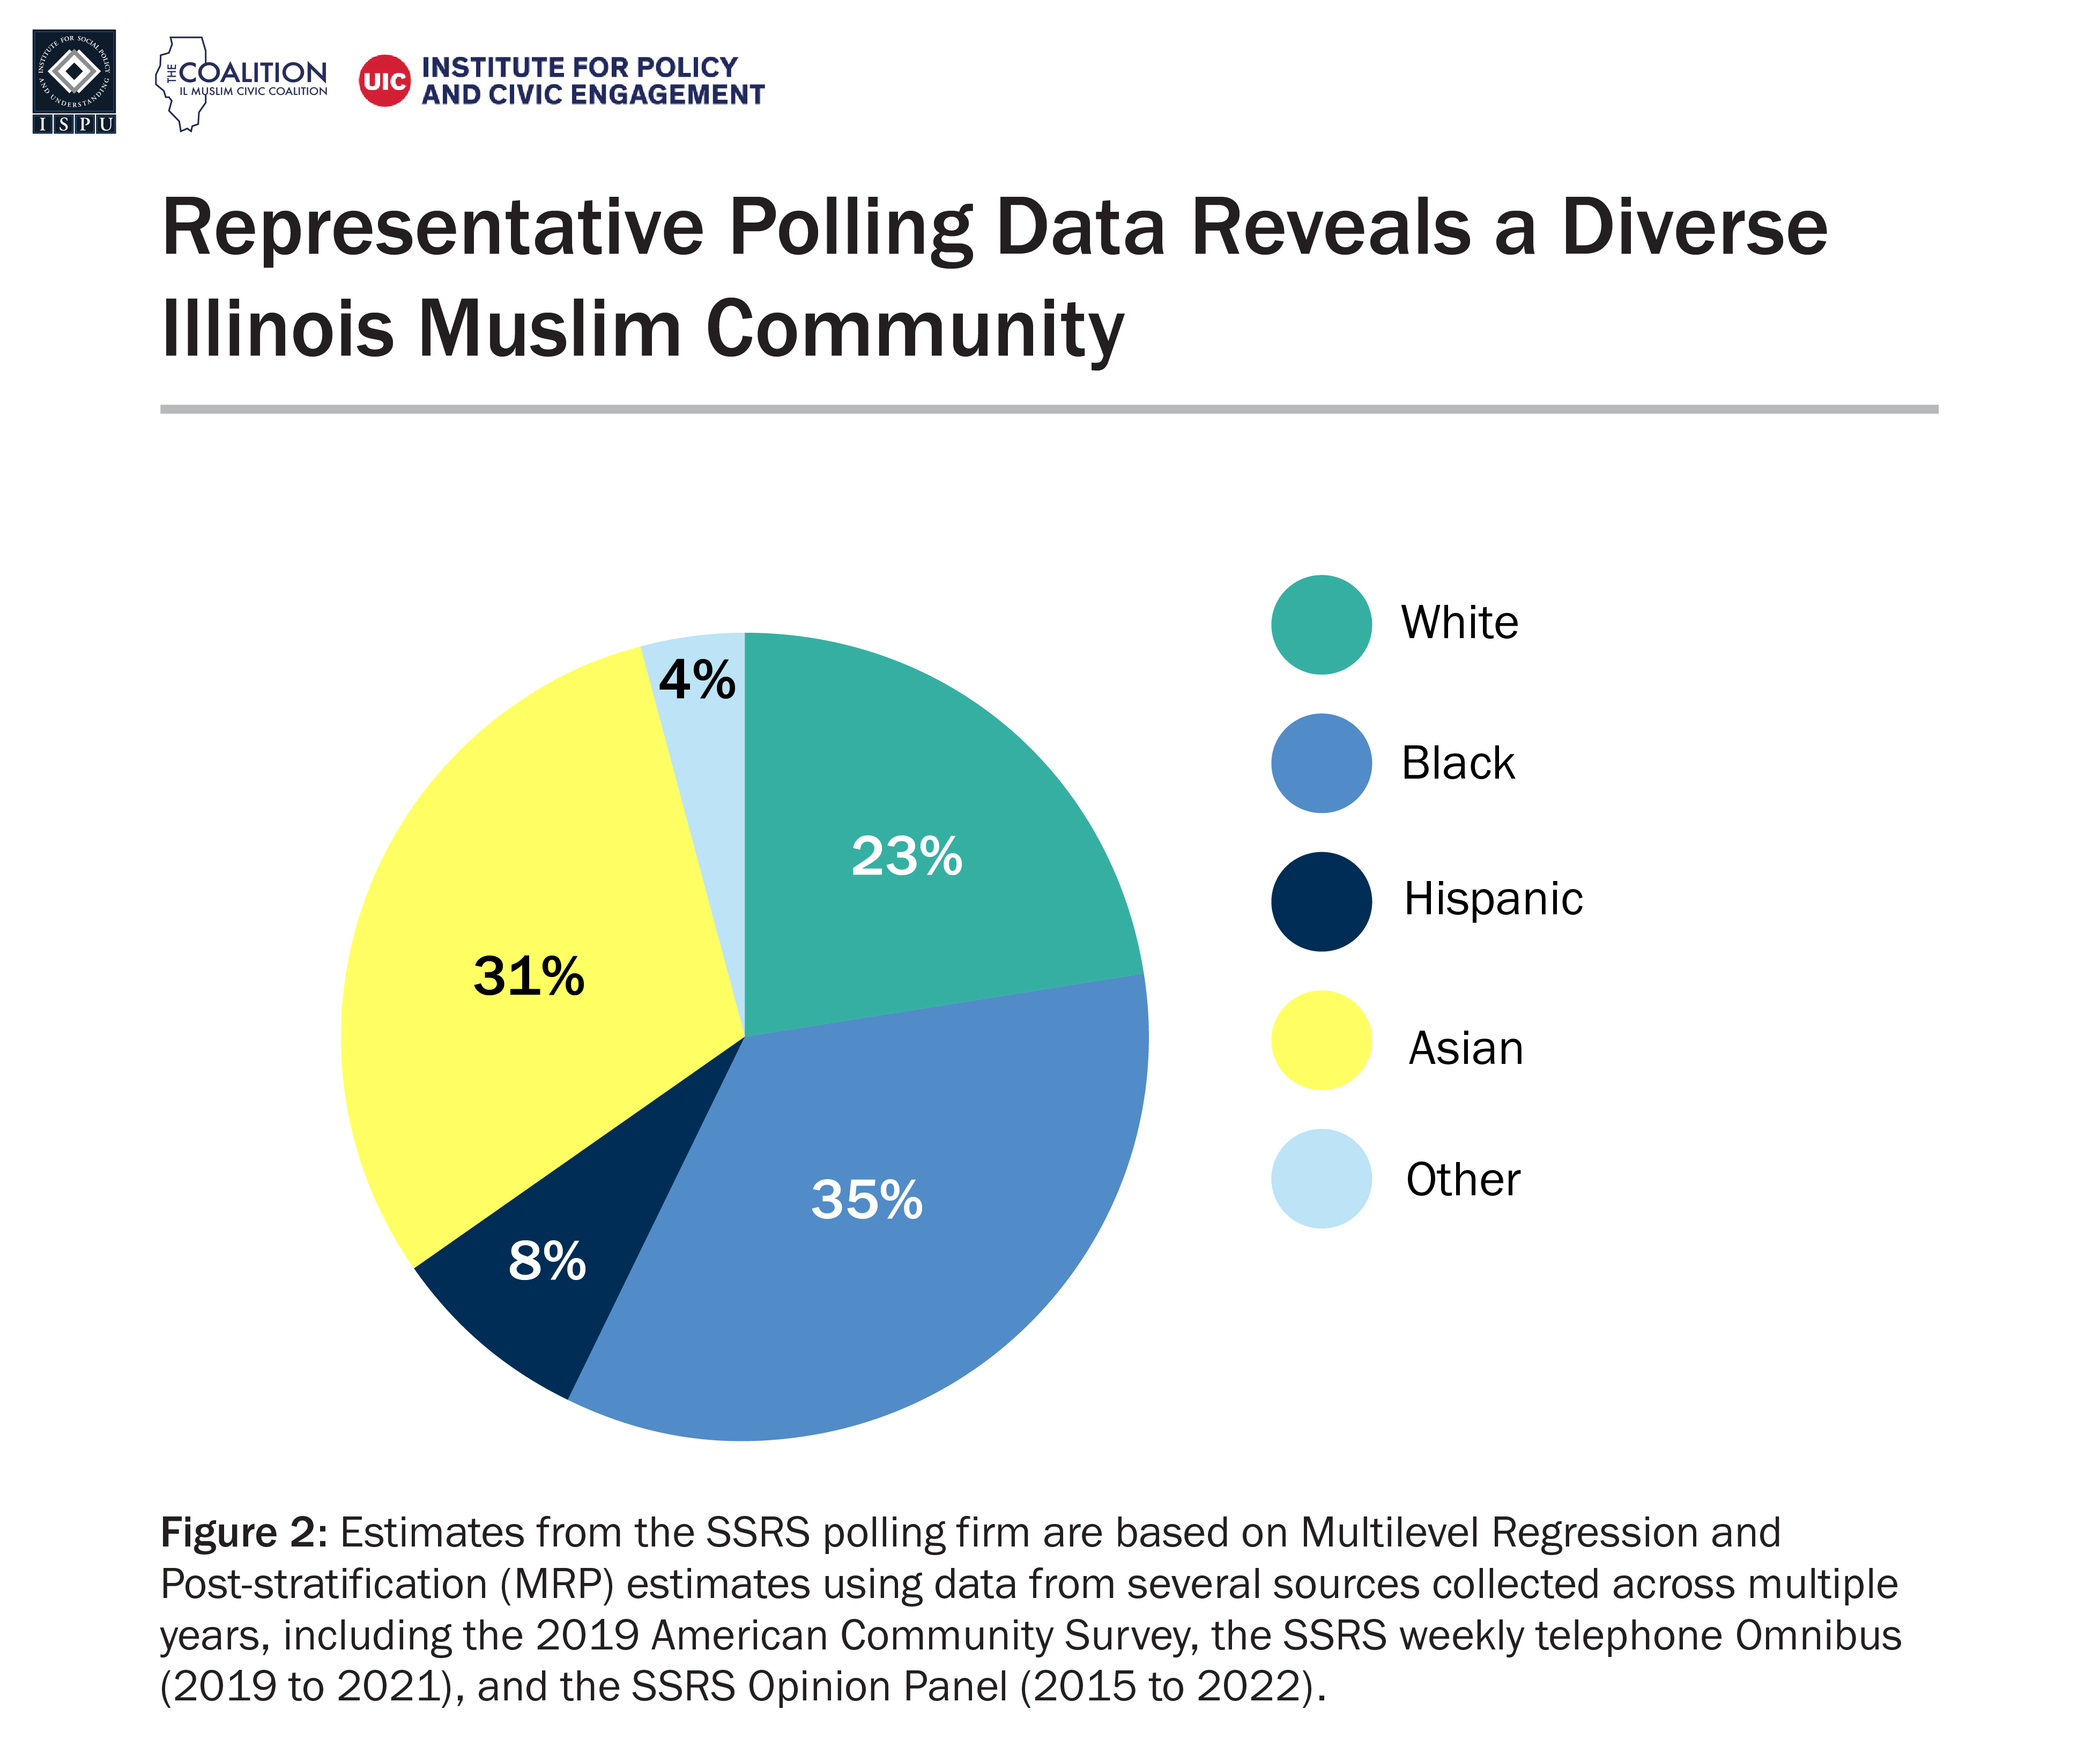 A pie chart showing the racial/ethnic diversity of the Illinois Muslim community based on representative polling data